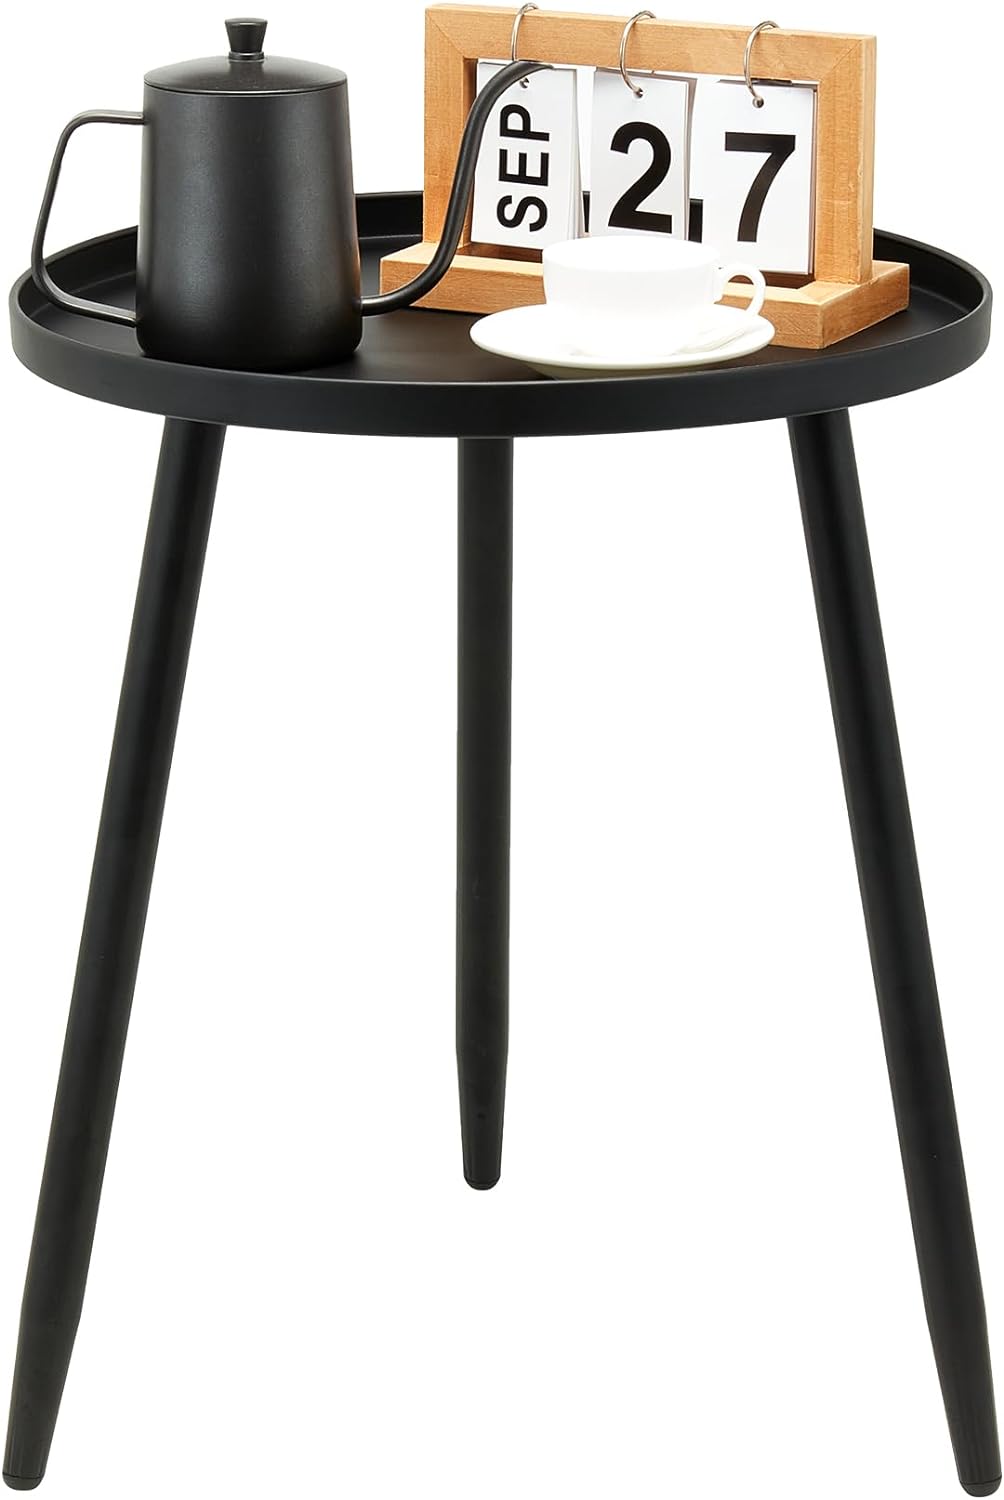 Decent End/Side Tables - Small Round Accent Table, Metal Black Narrow Night Stands with 3 Legs, Ideal for Any Room-Side Tables Living Room, Bedroom, Tall Plant Stand Balcony, Indoor & Outdoor